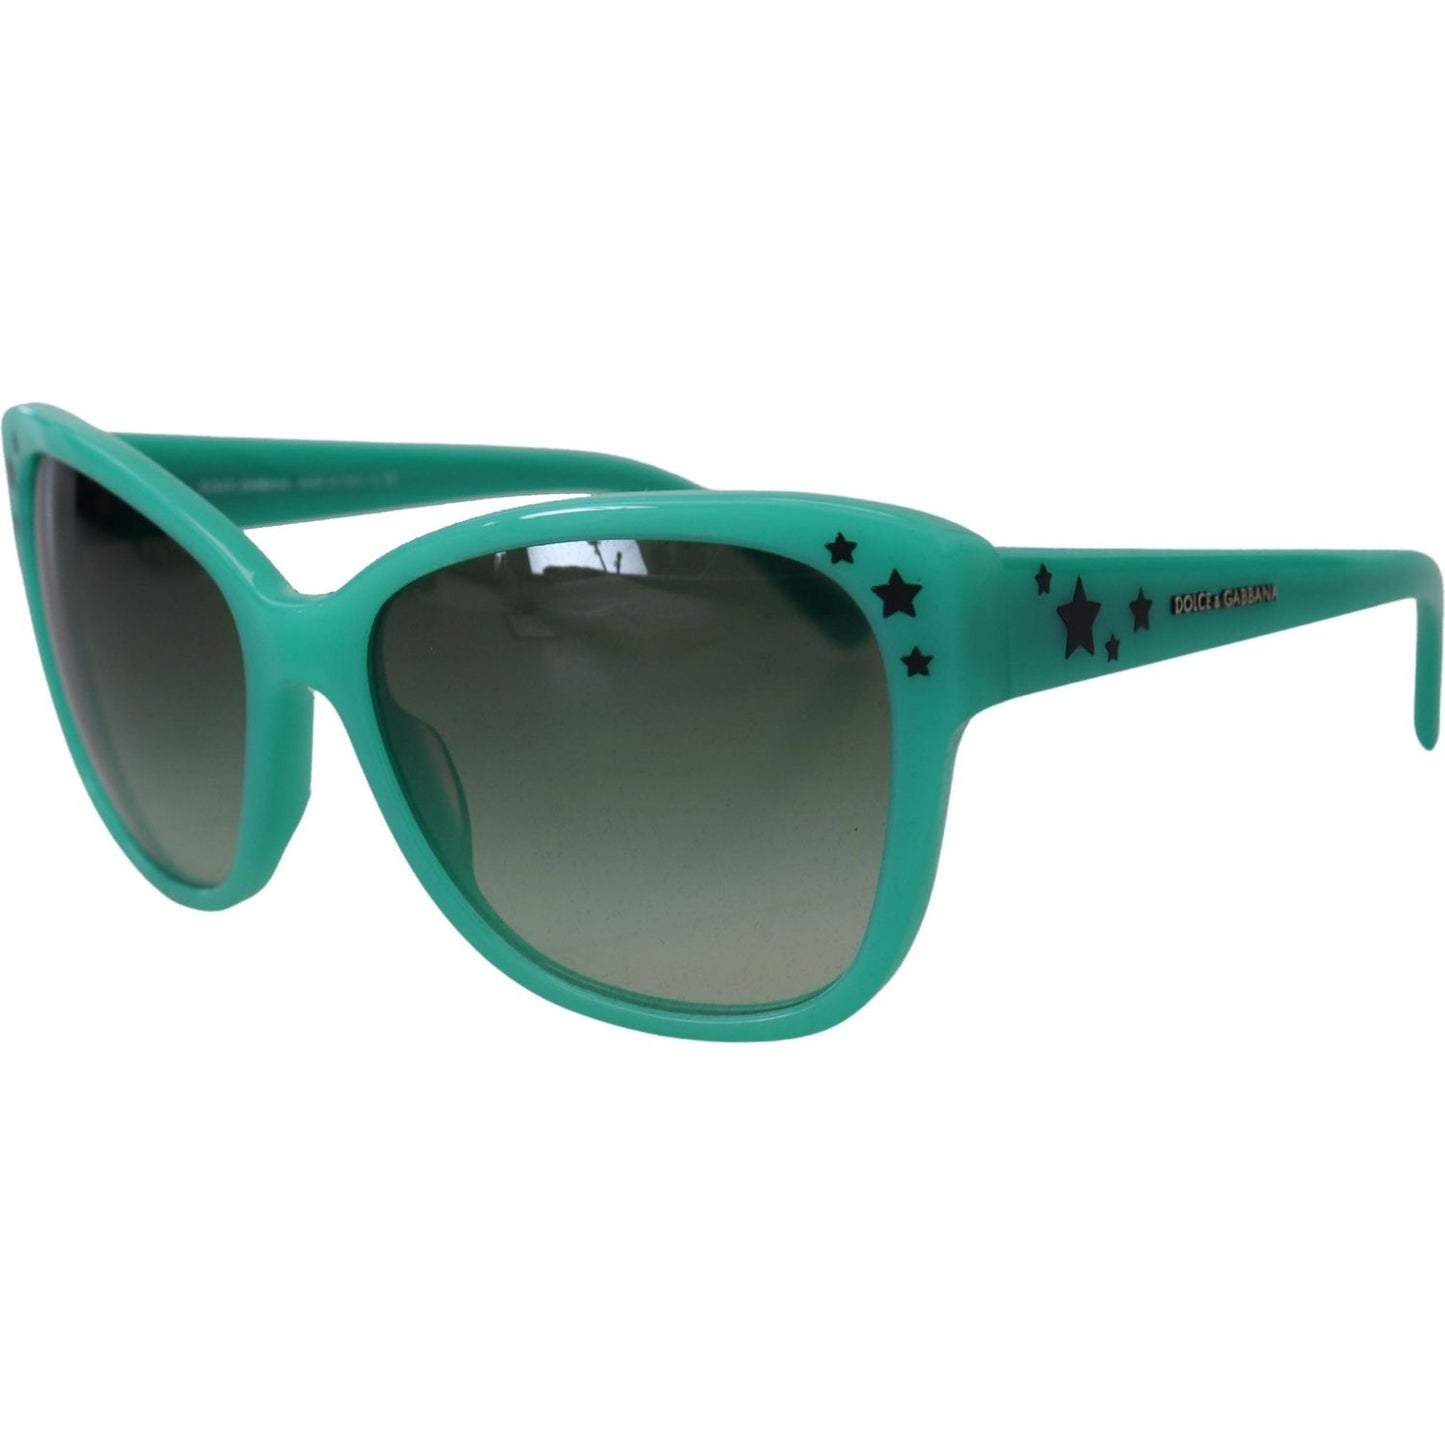 Dolce & Gabbana Enigmatic Star-Patterned Square Sunglasses green-stars-acetate-square-shades-dg4124-sunglasses IMG_4010-scaled-0a342b02-134.jpg